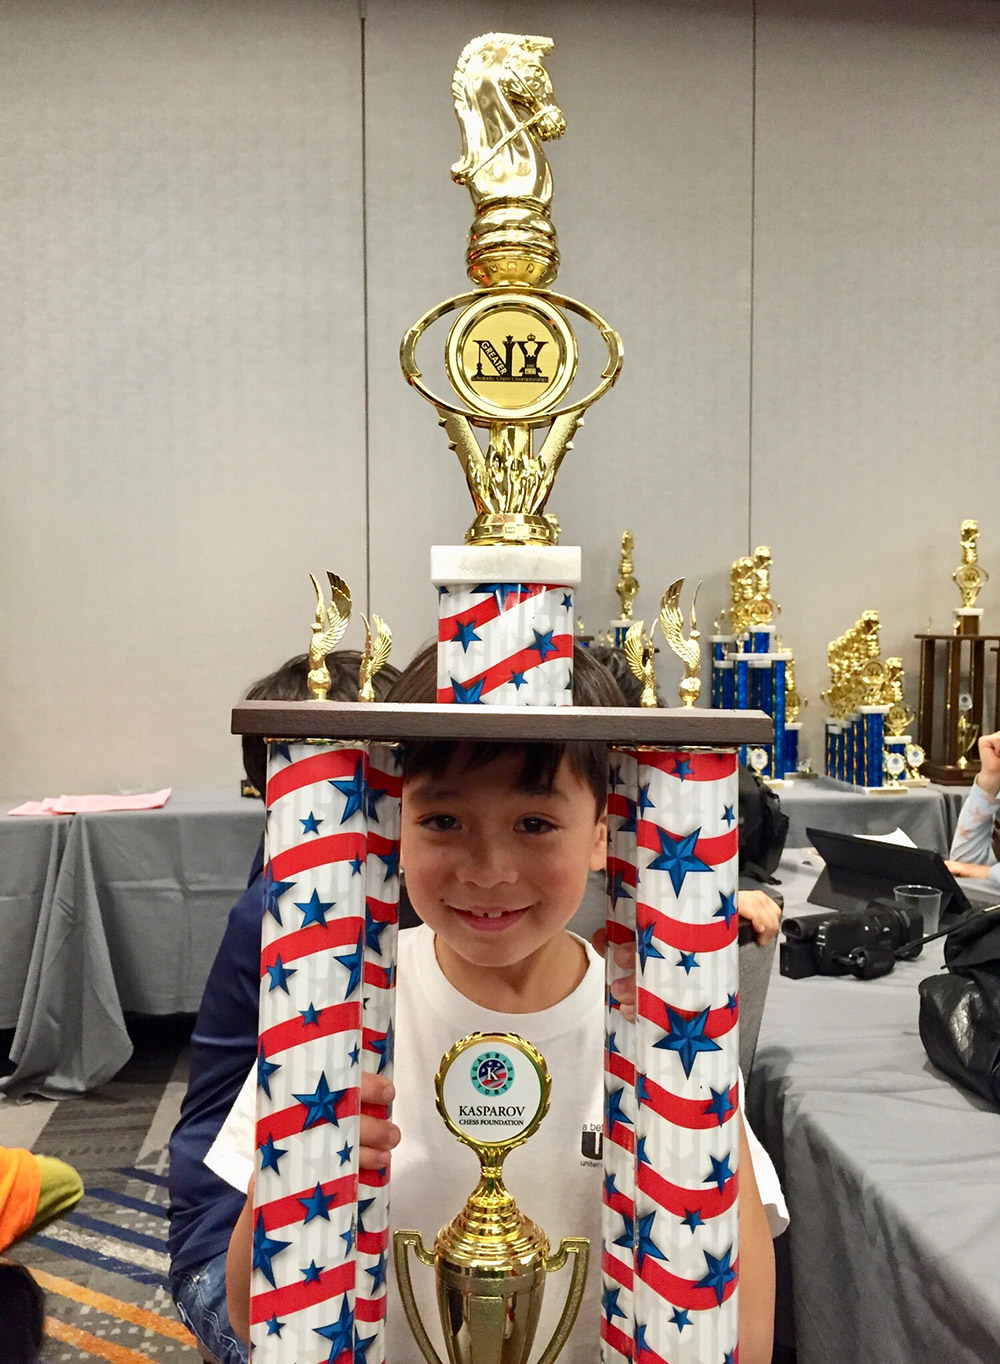 Oliver was crowned New York City Champion at the Kasparov Greater New York Scholastic Chess Championships. February, 2017